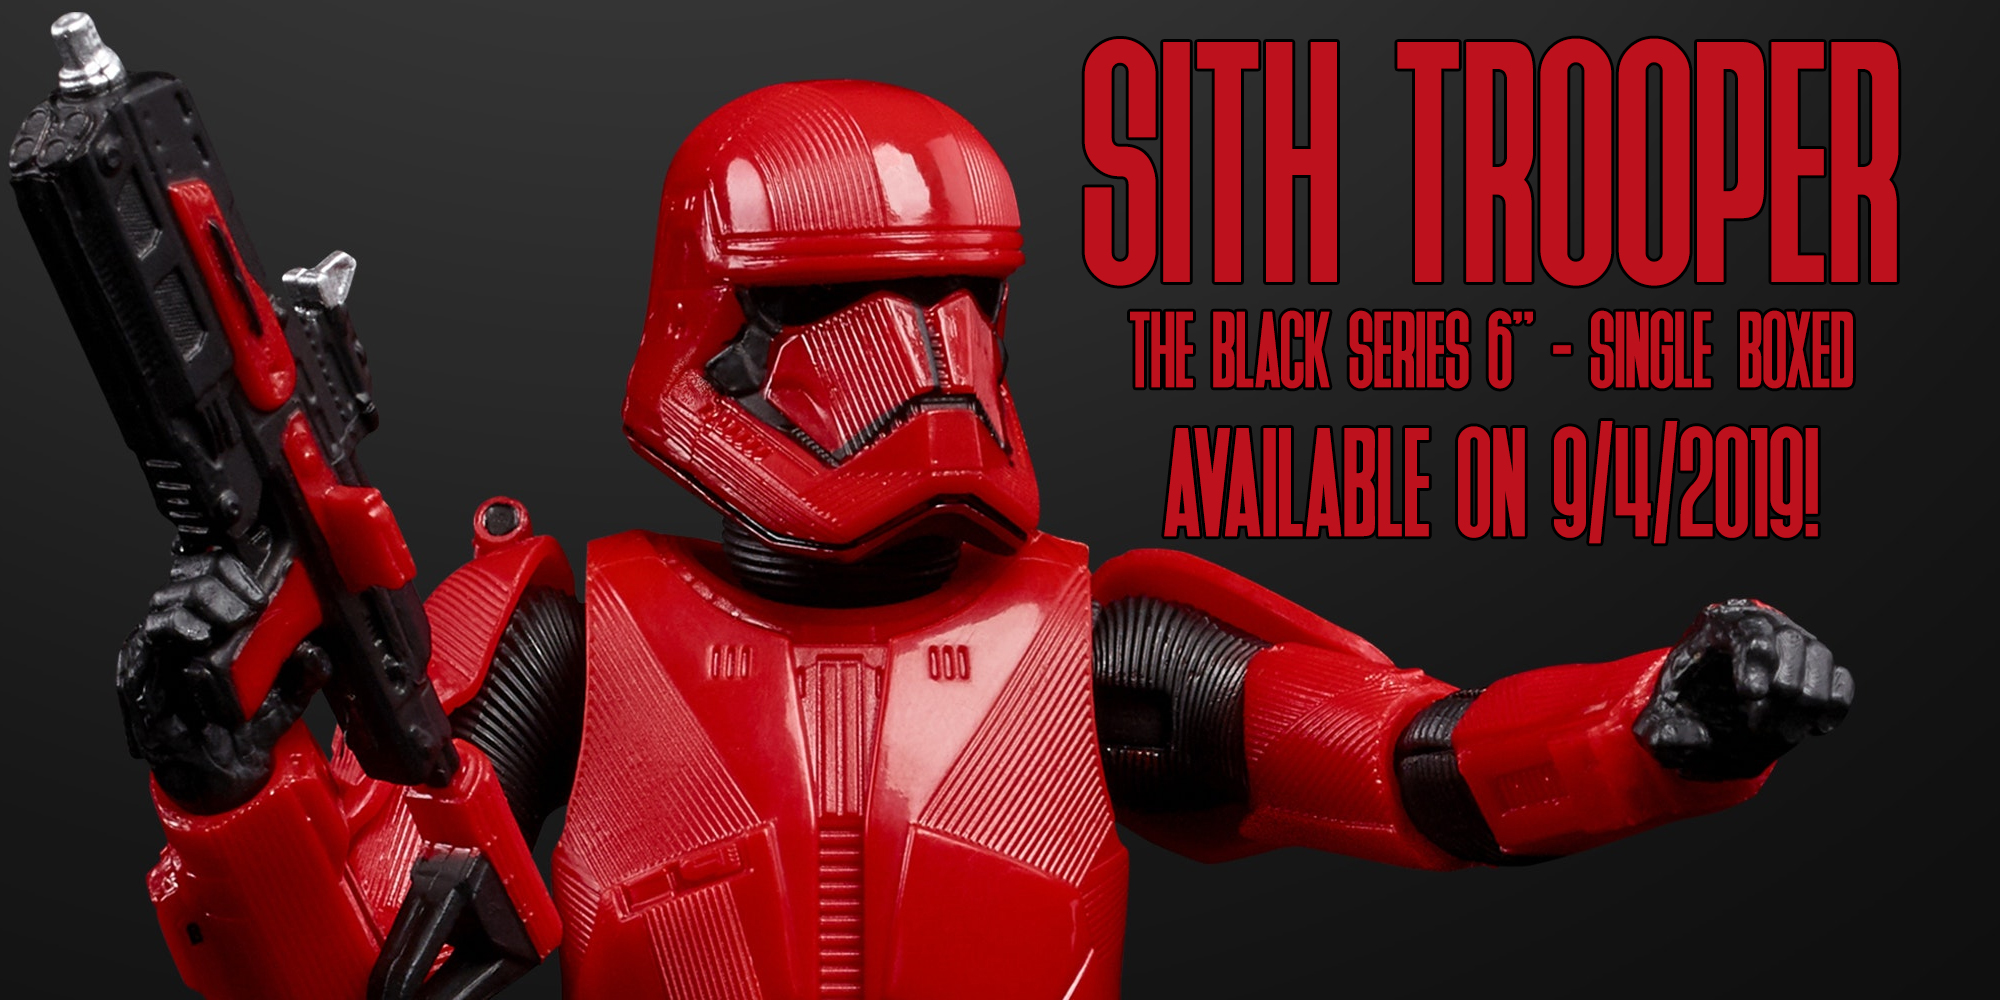 REMINDER: The Black Series 6" Sith Trooper (single boxed) Will Be Available On 9/4/2019!